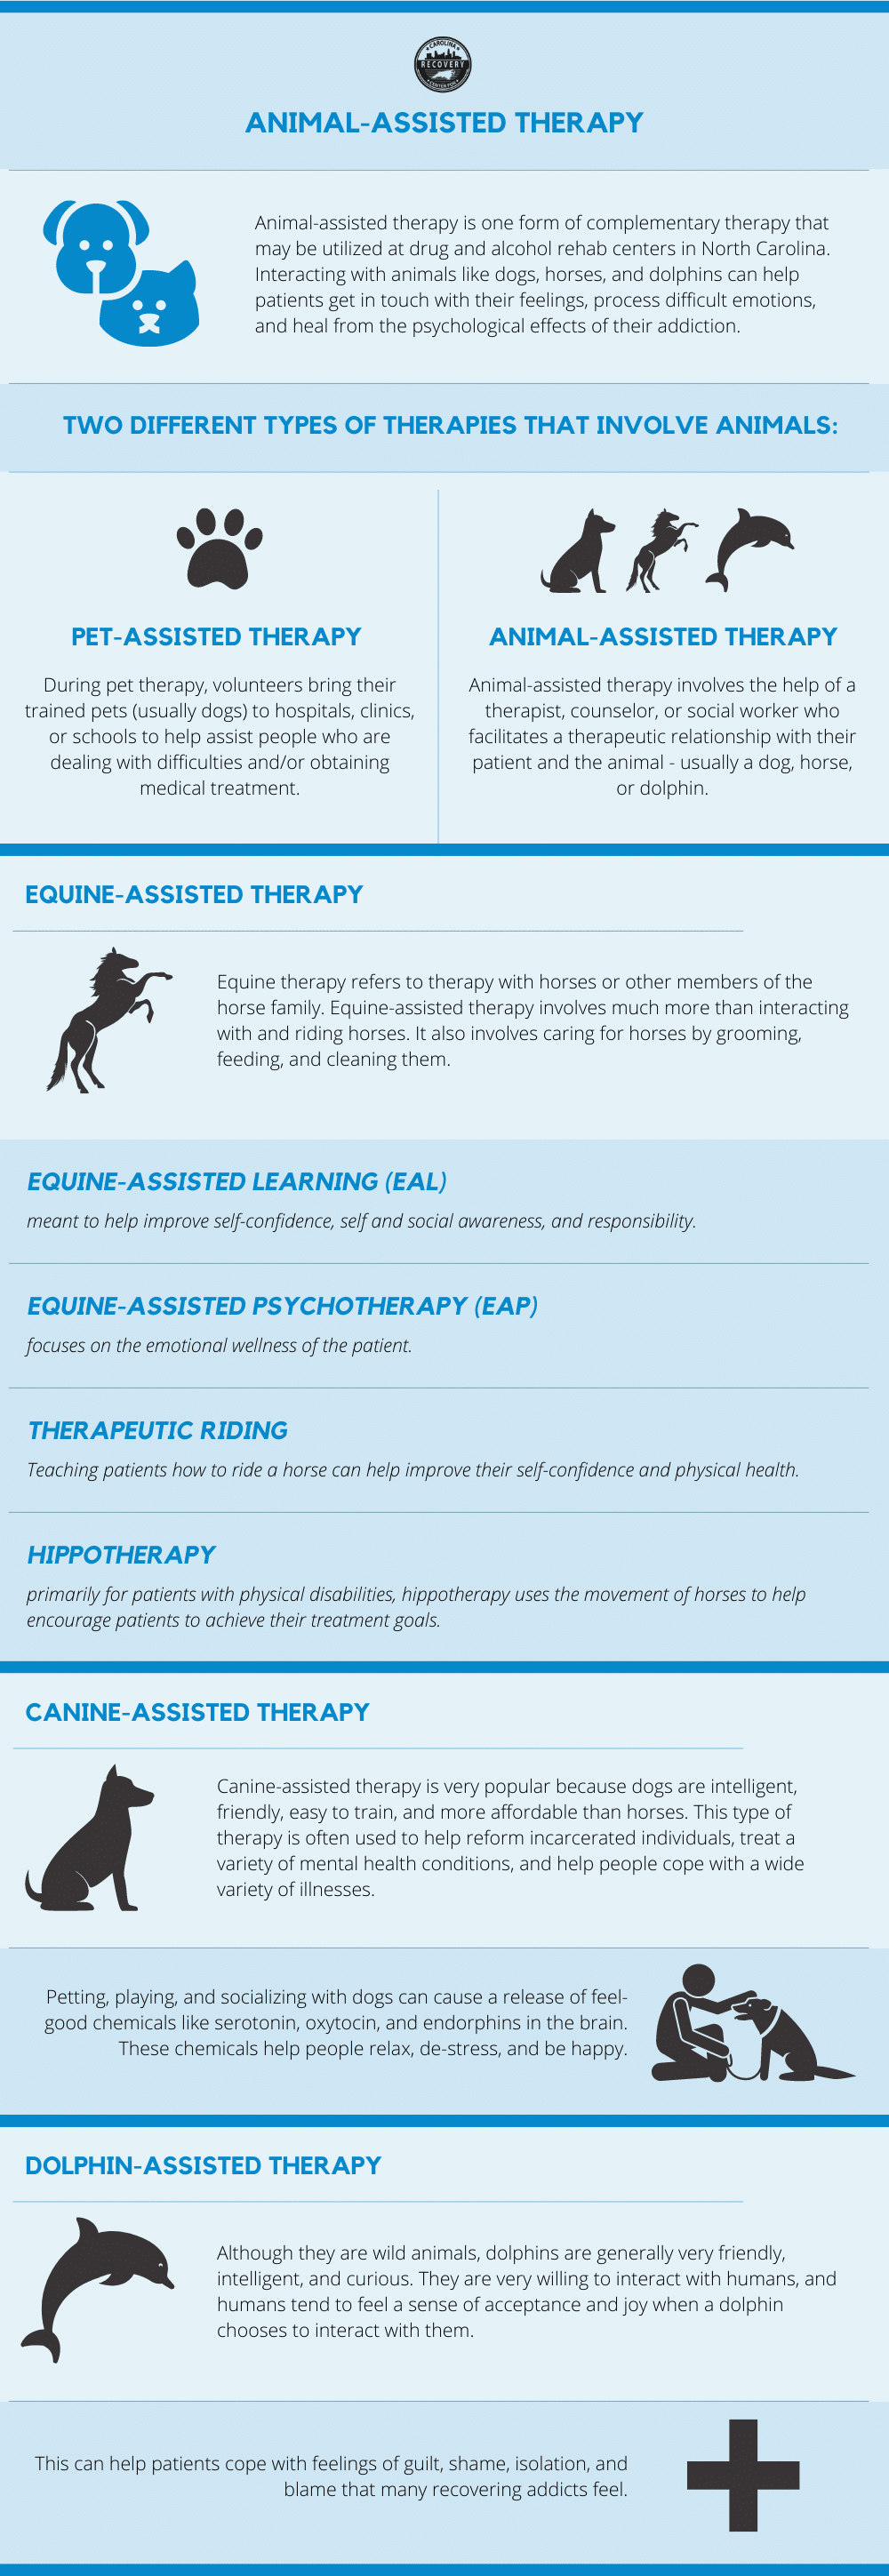 Animal-Assisted Therapy